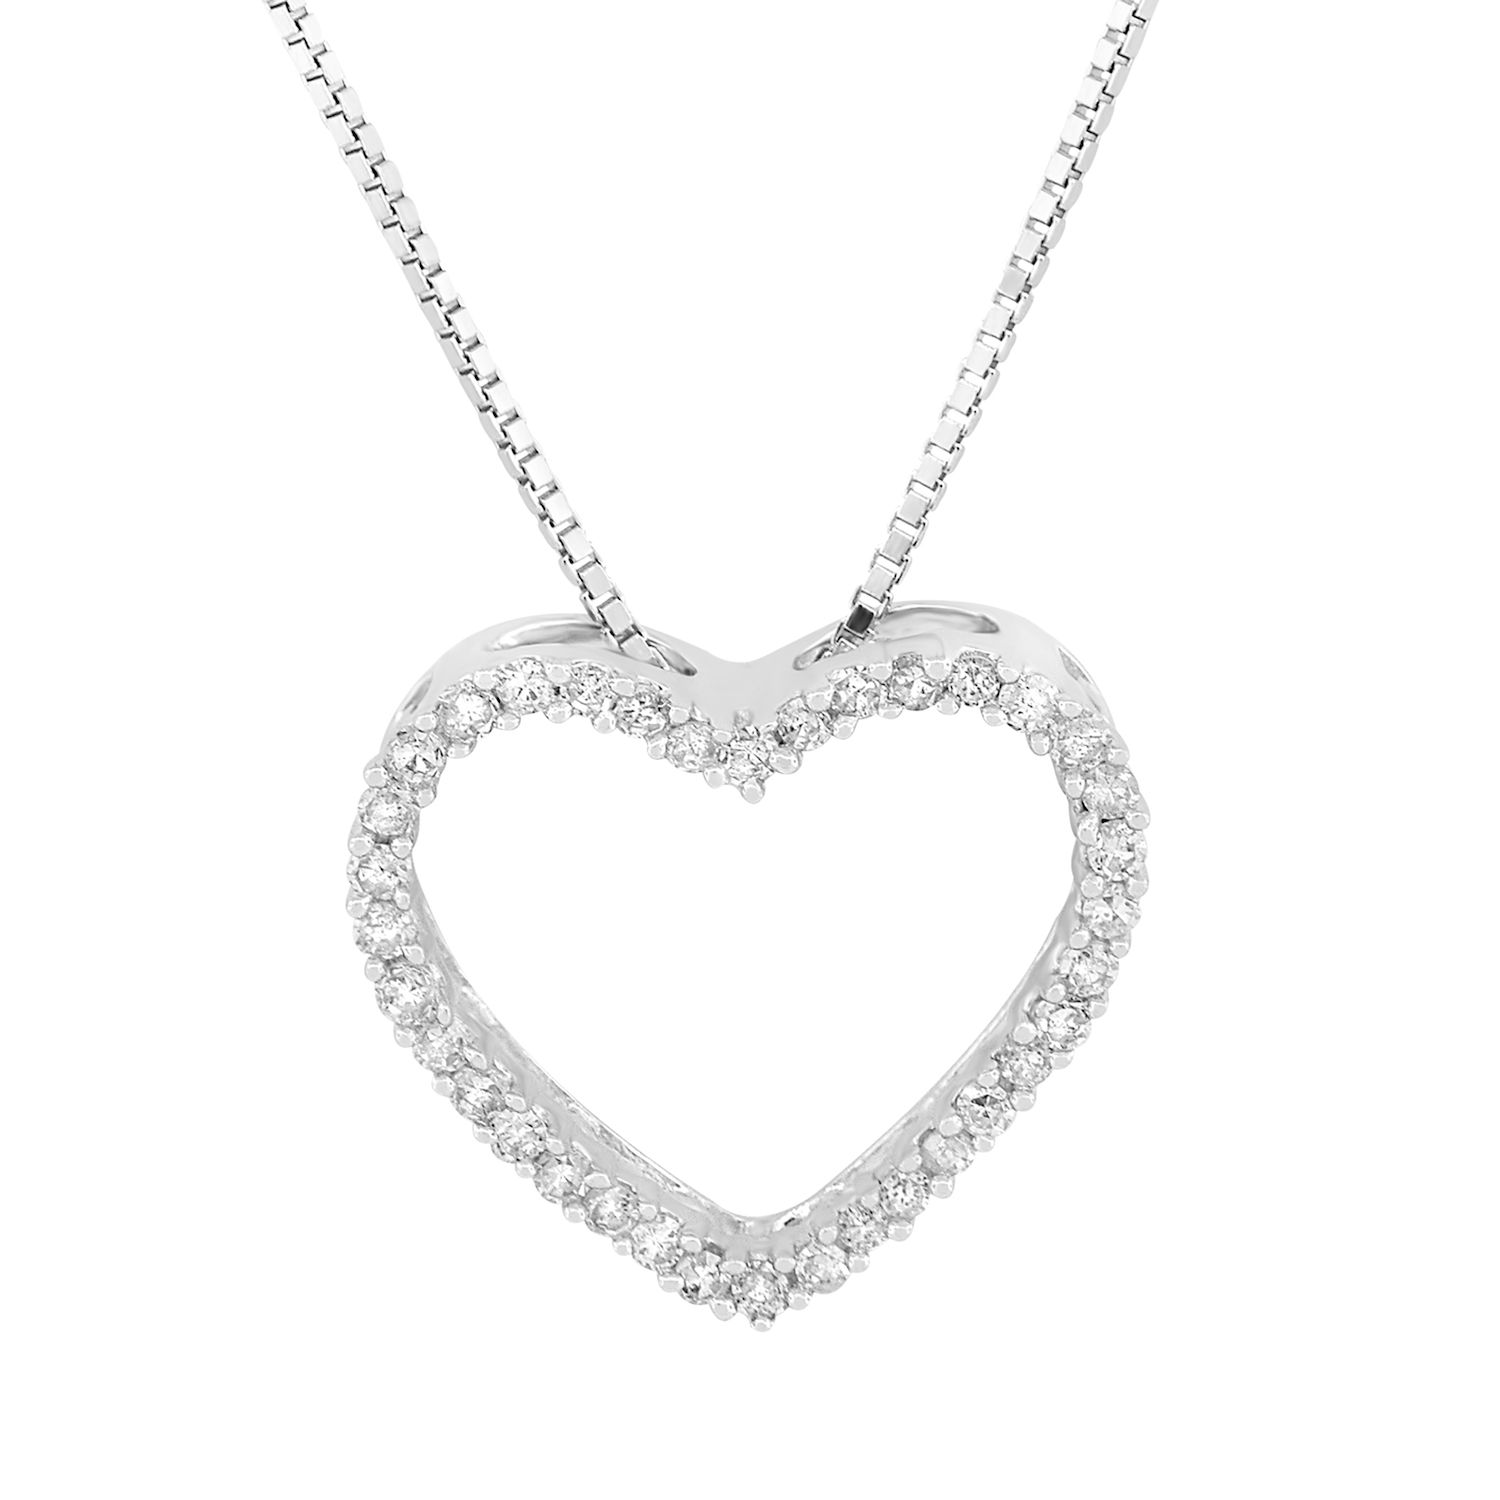 Image for HDI Sterling Silver 1/5 Carat T.W. Diamond Openwork Heart Necklace at Kohl's.